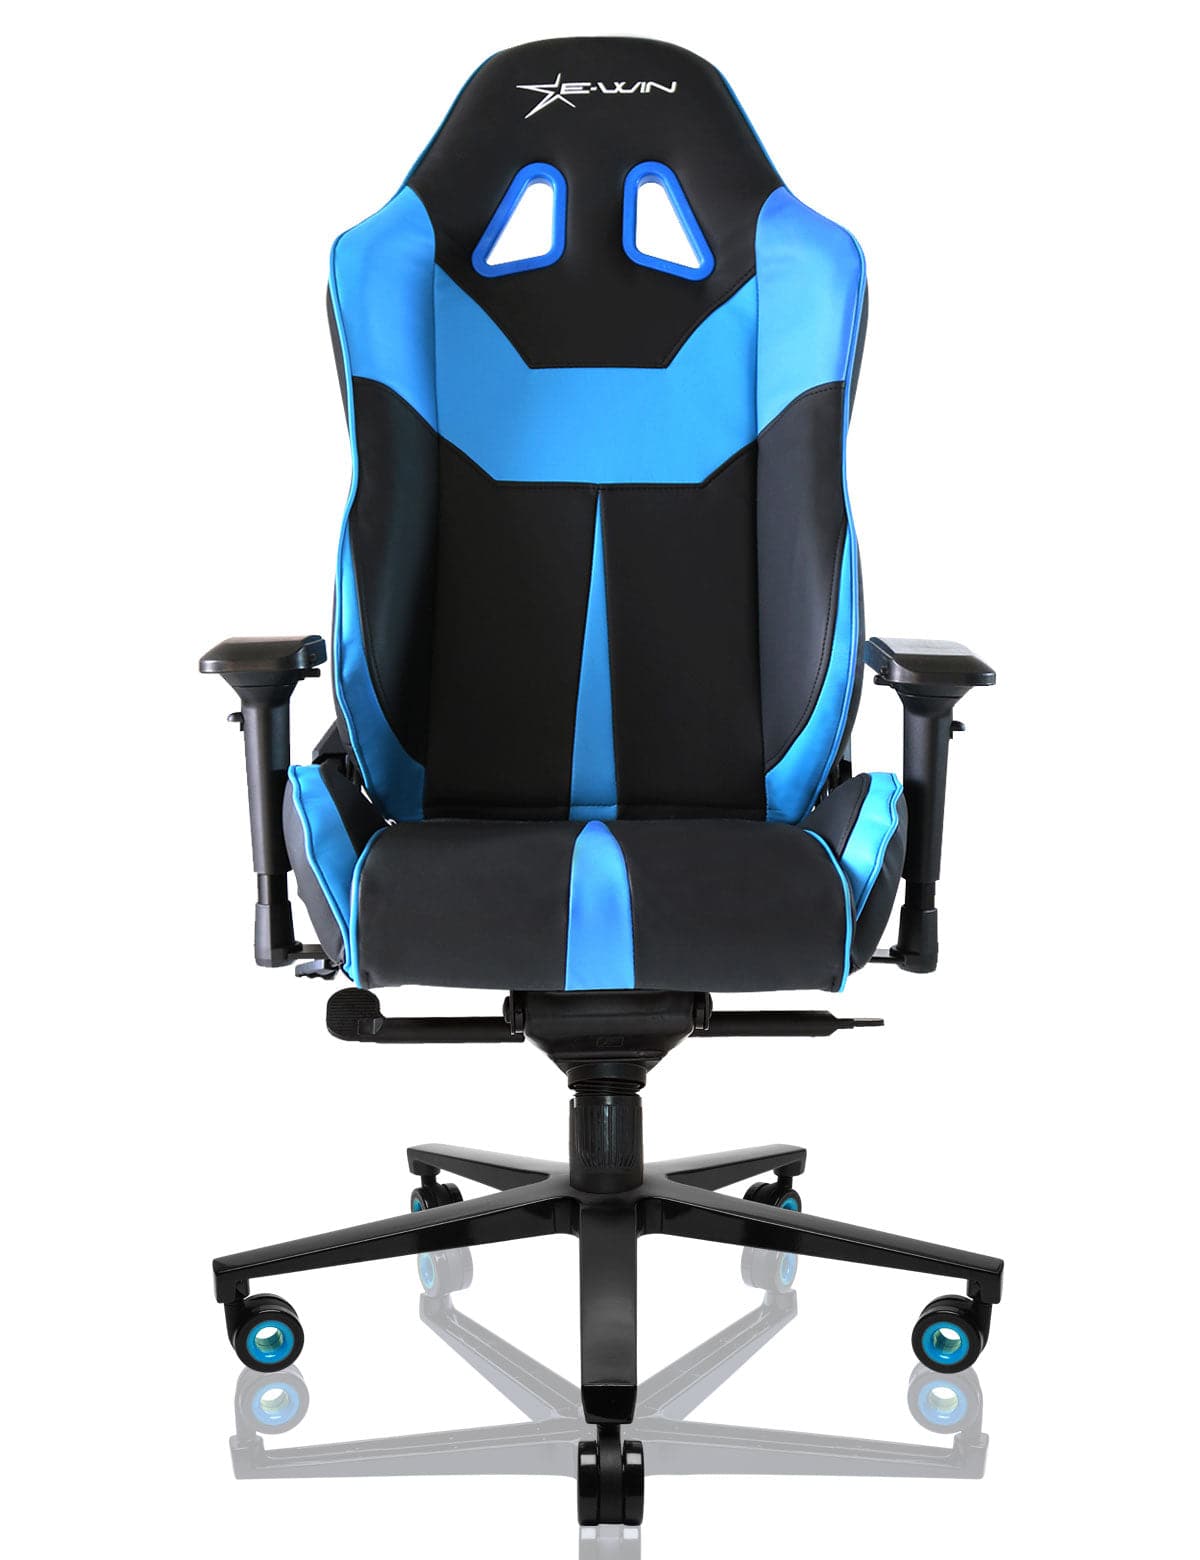 E-WIN Champion Series Ergonomic Computer Gaming Office Chair with Pillows - CPC